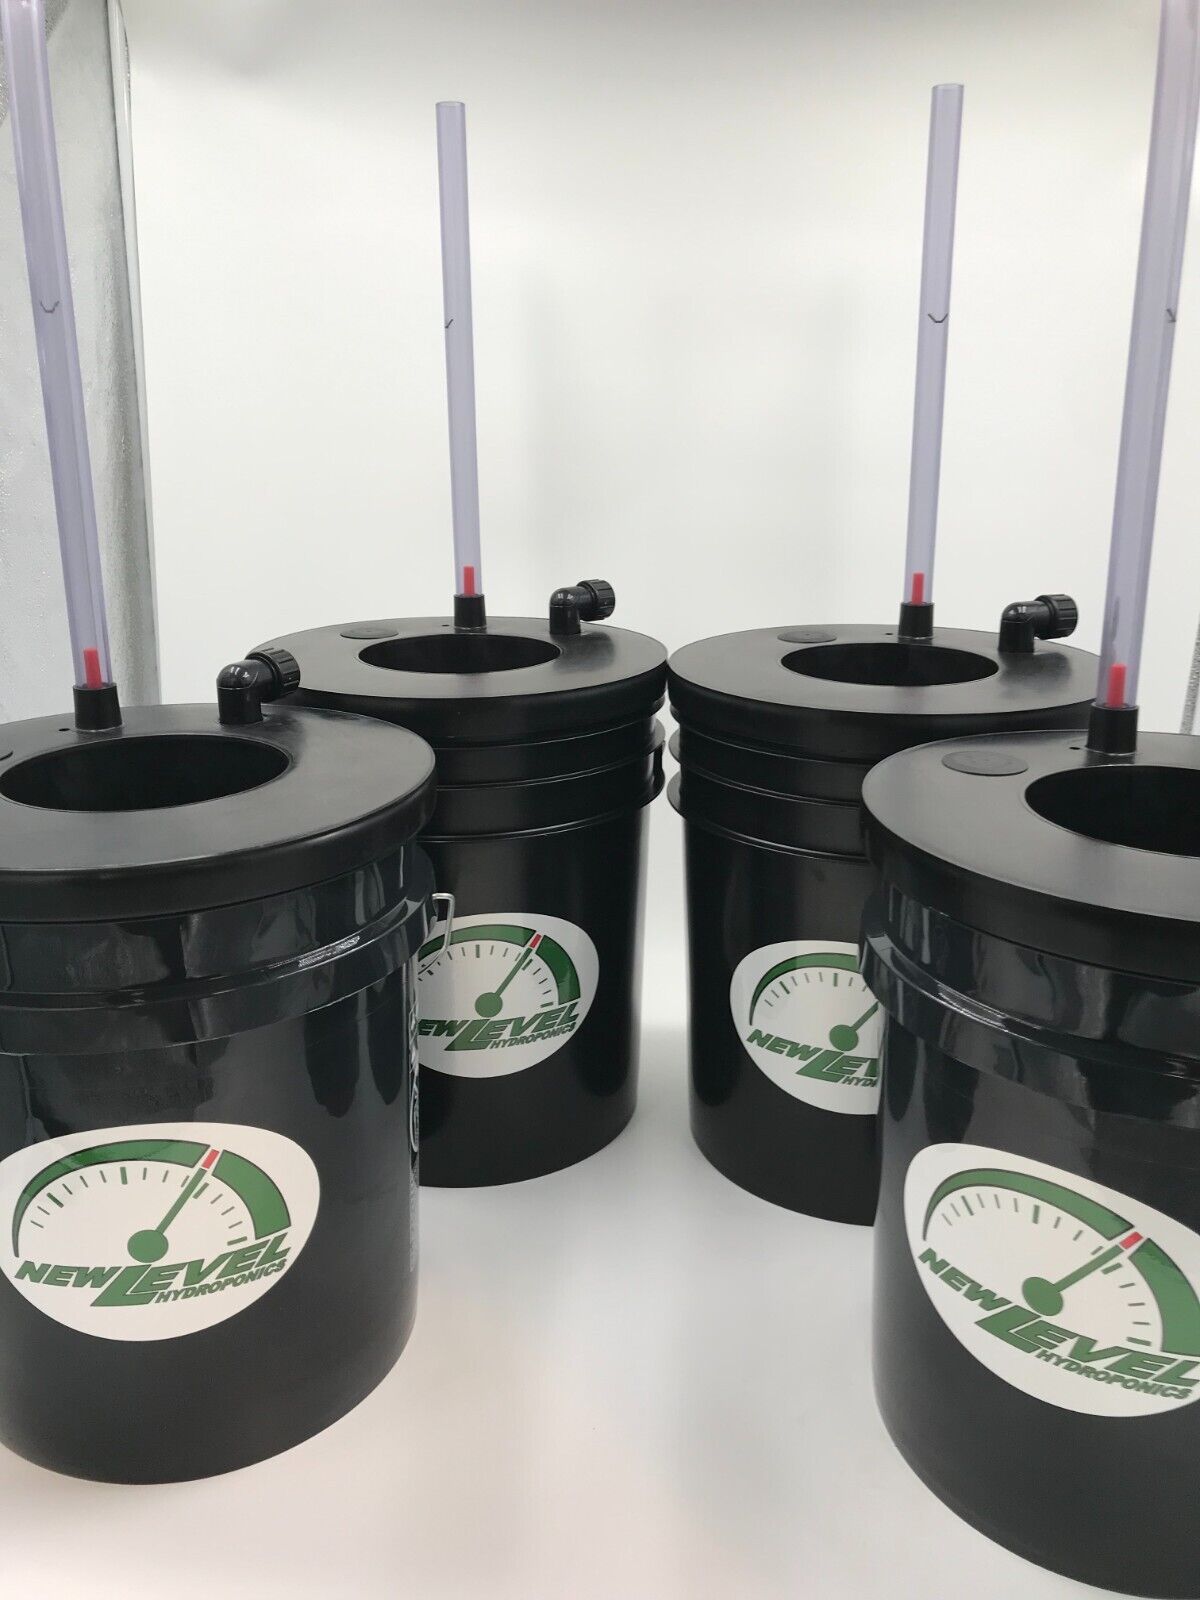 4 Bucket and Grow LID DWC combo - NEW LEVEL HYDROPONICS  -  3.5 or 5 gallon